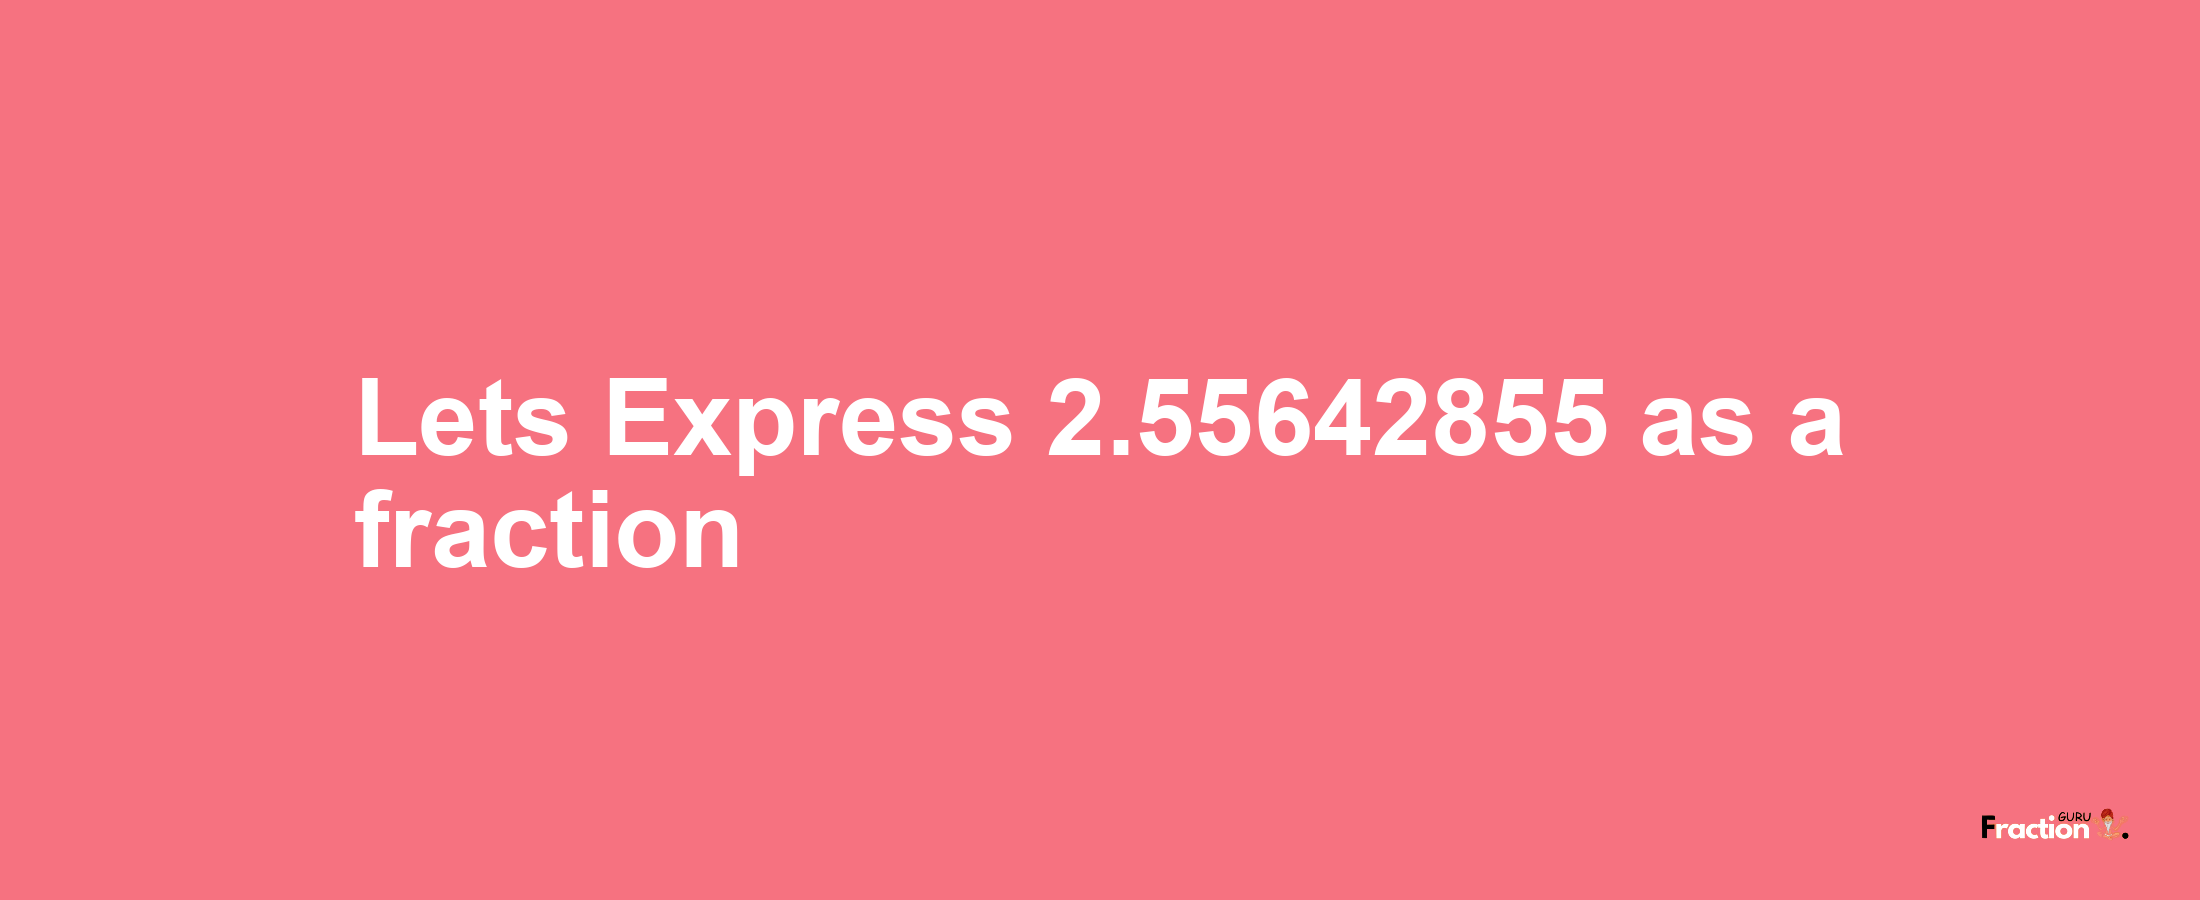 Lets Express 2.55642855 as afraction